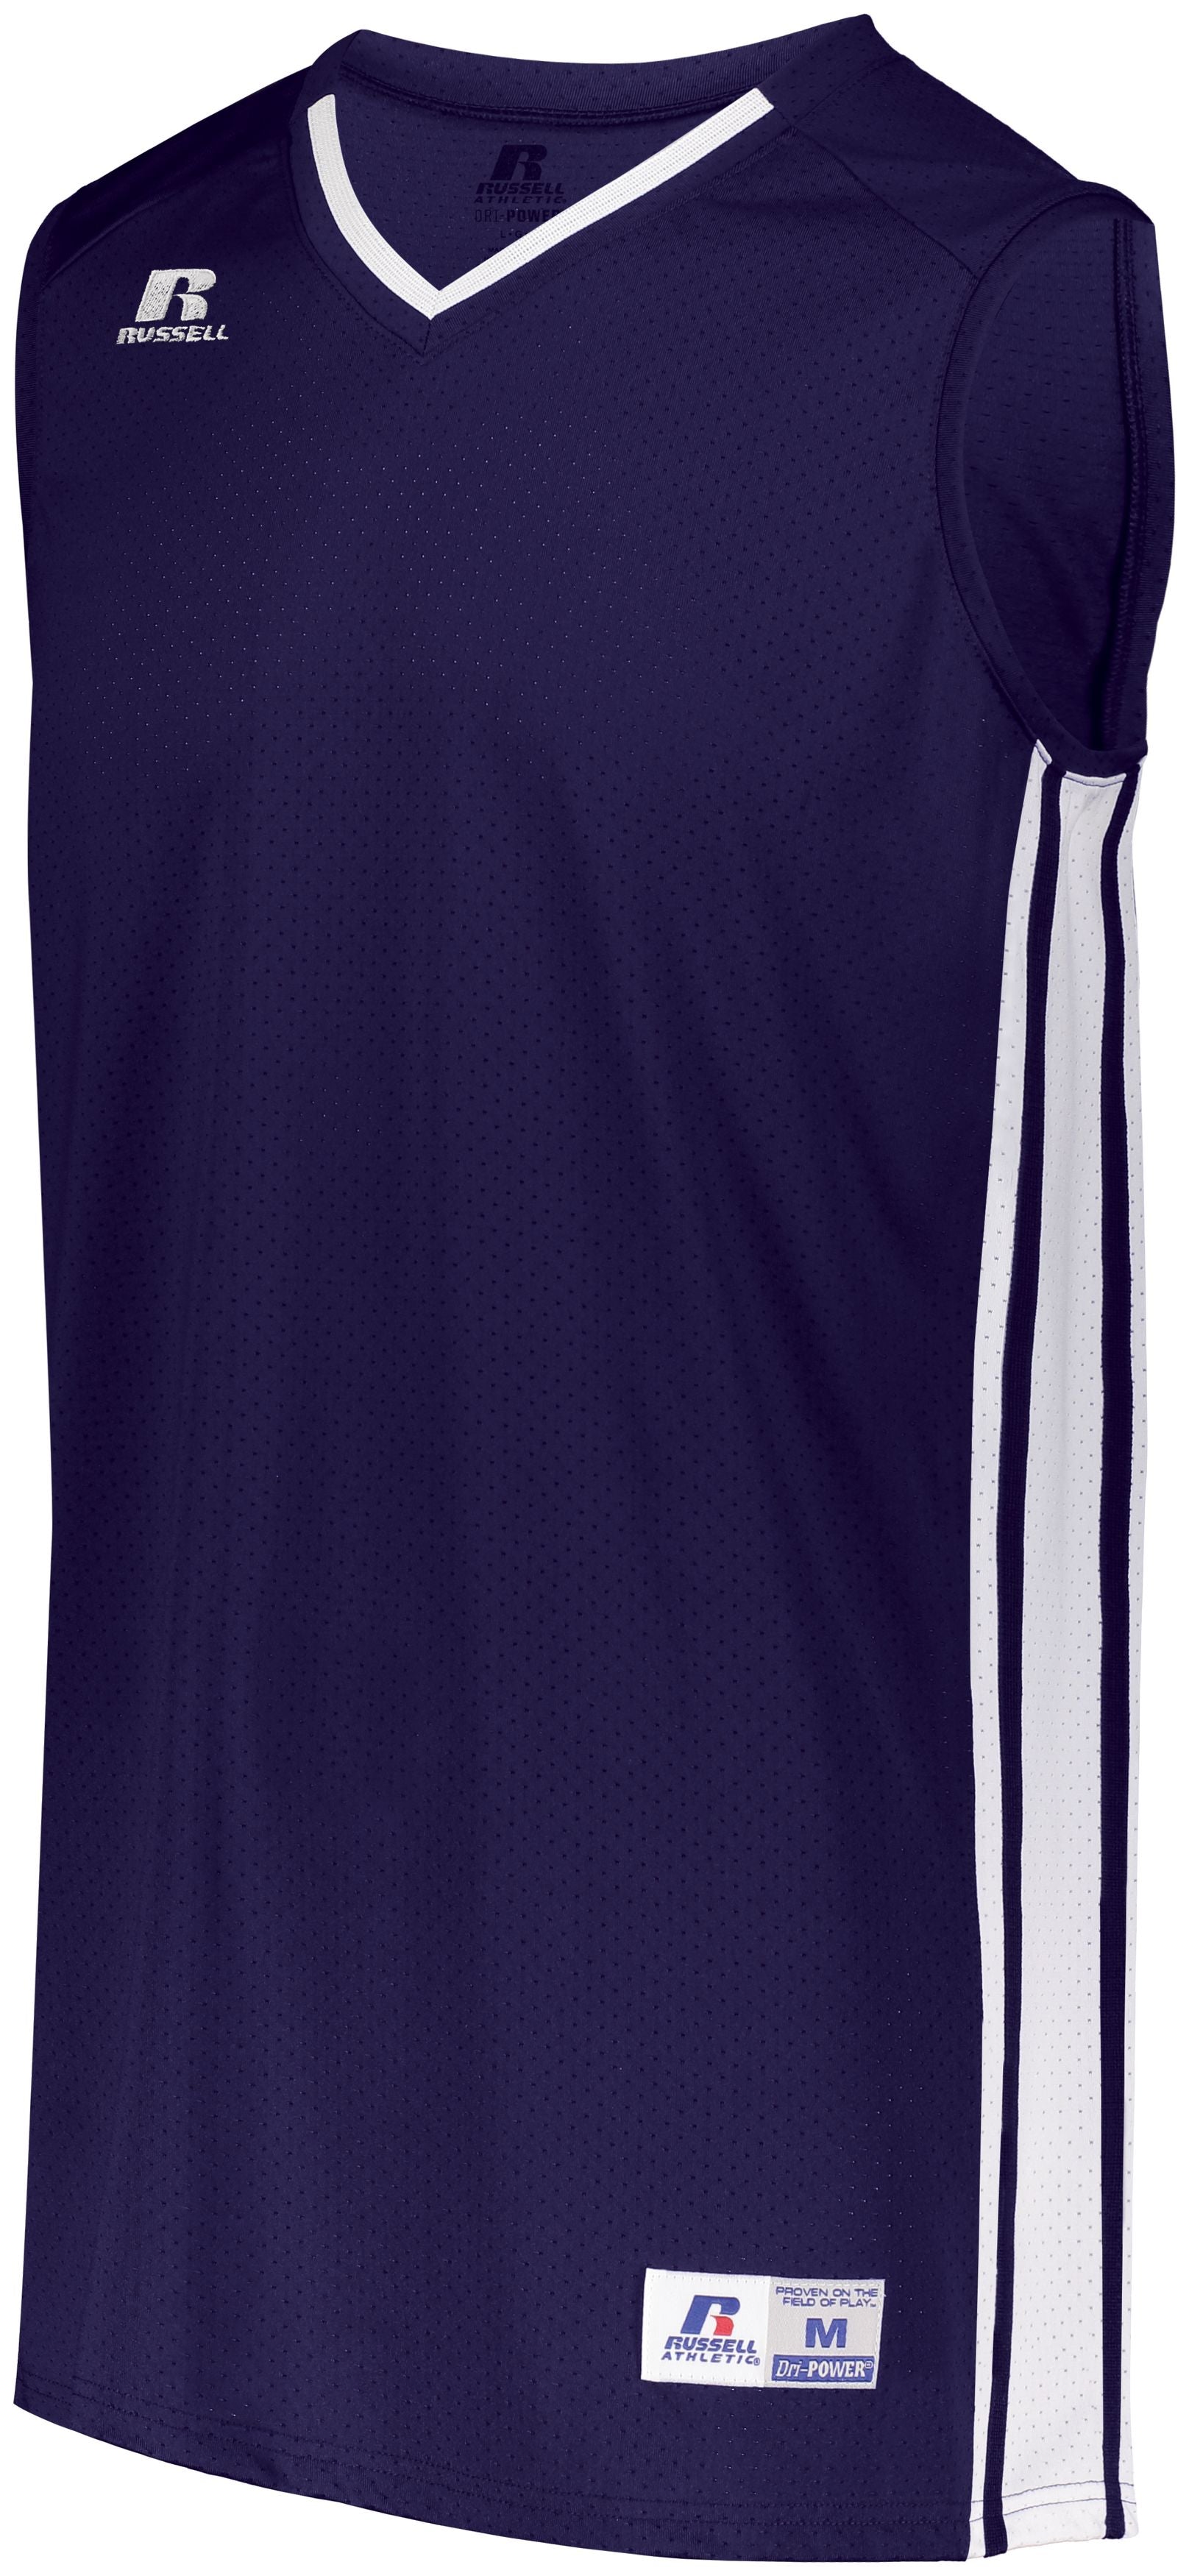 Russell Athletic Youth Legacy Basketball Jersey in Purple/White  -Part of the Youth, Youth-Jersey, Basketball, Russell-Athletic-Products, Shirts, All-Sports, All-Sports-1 product lines at KanaleyCreations.com